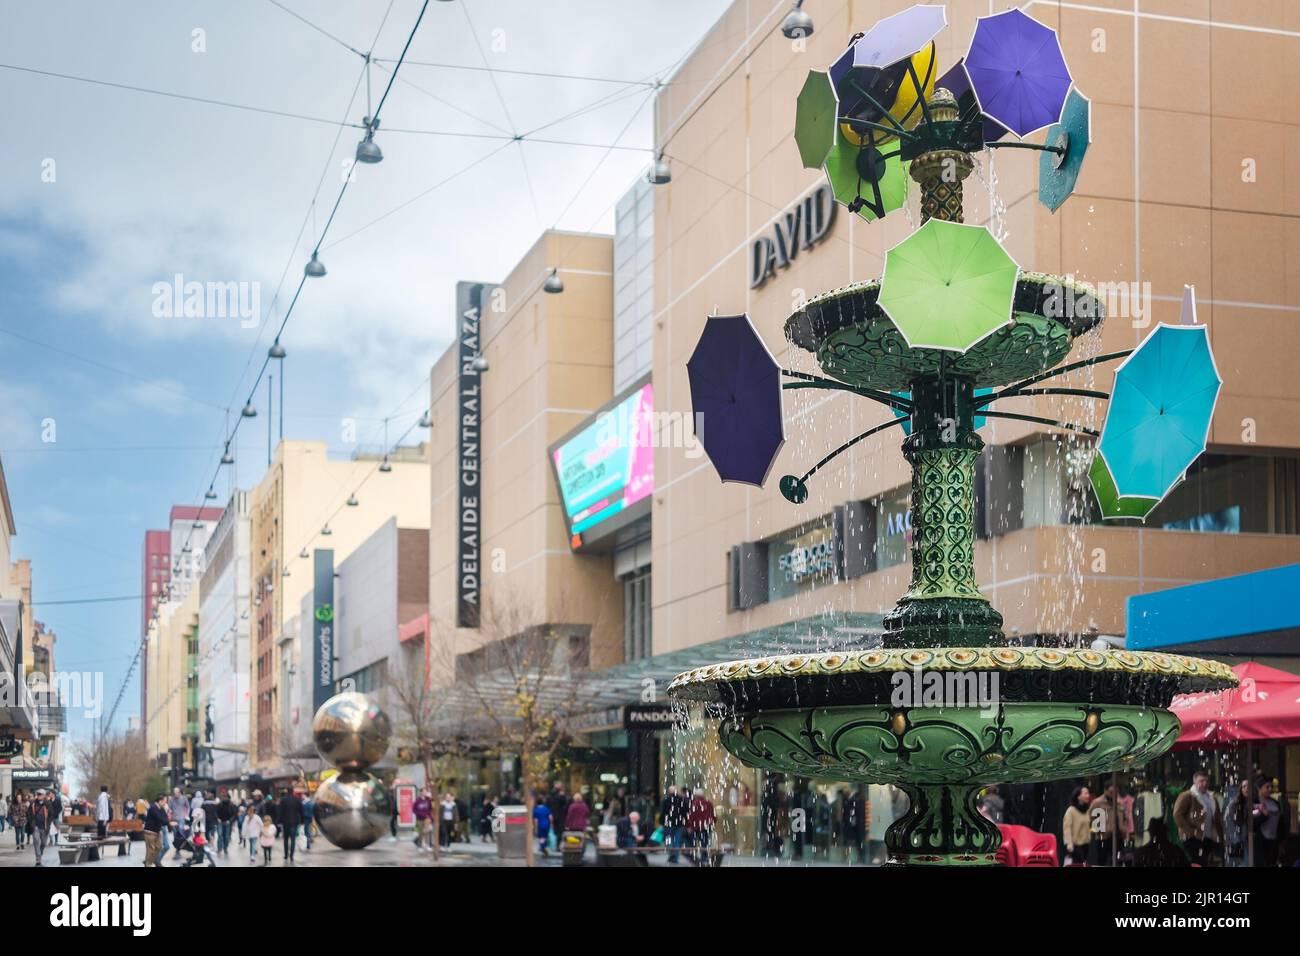 Adelaide, South Australia - August 10, 2019: Iconic Adelaide Arcade fountain viewed along the Rundle Mall after the rain Stock Photo